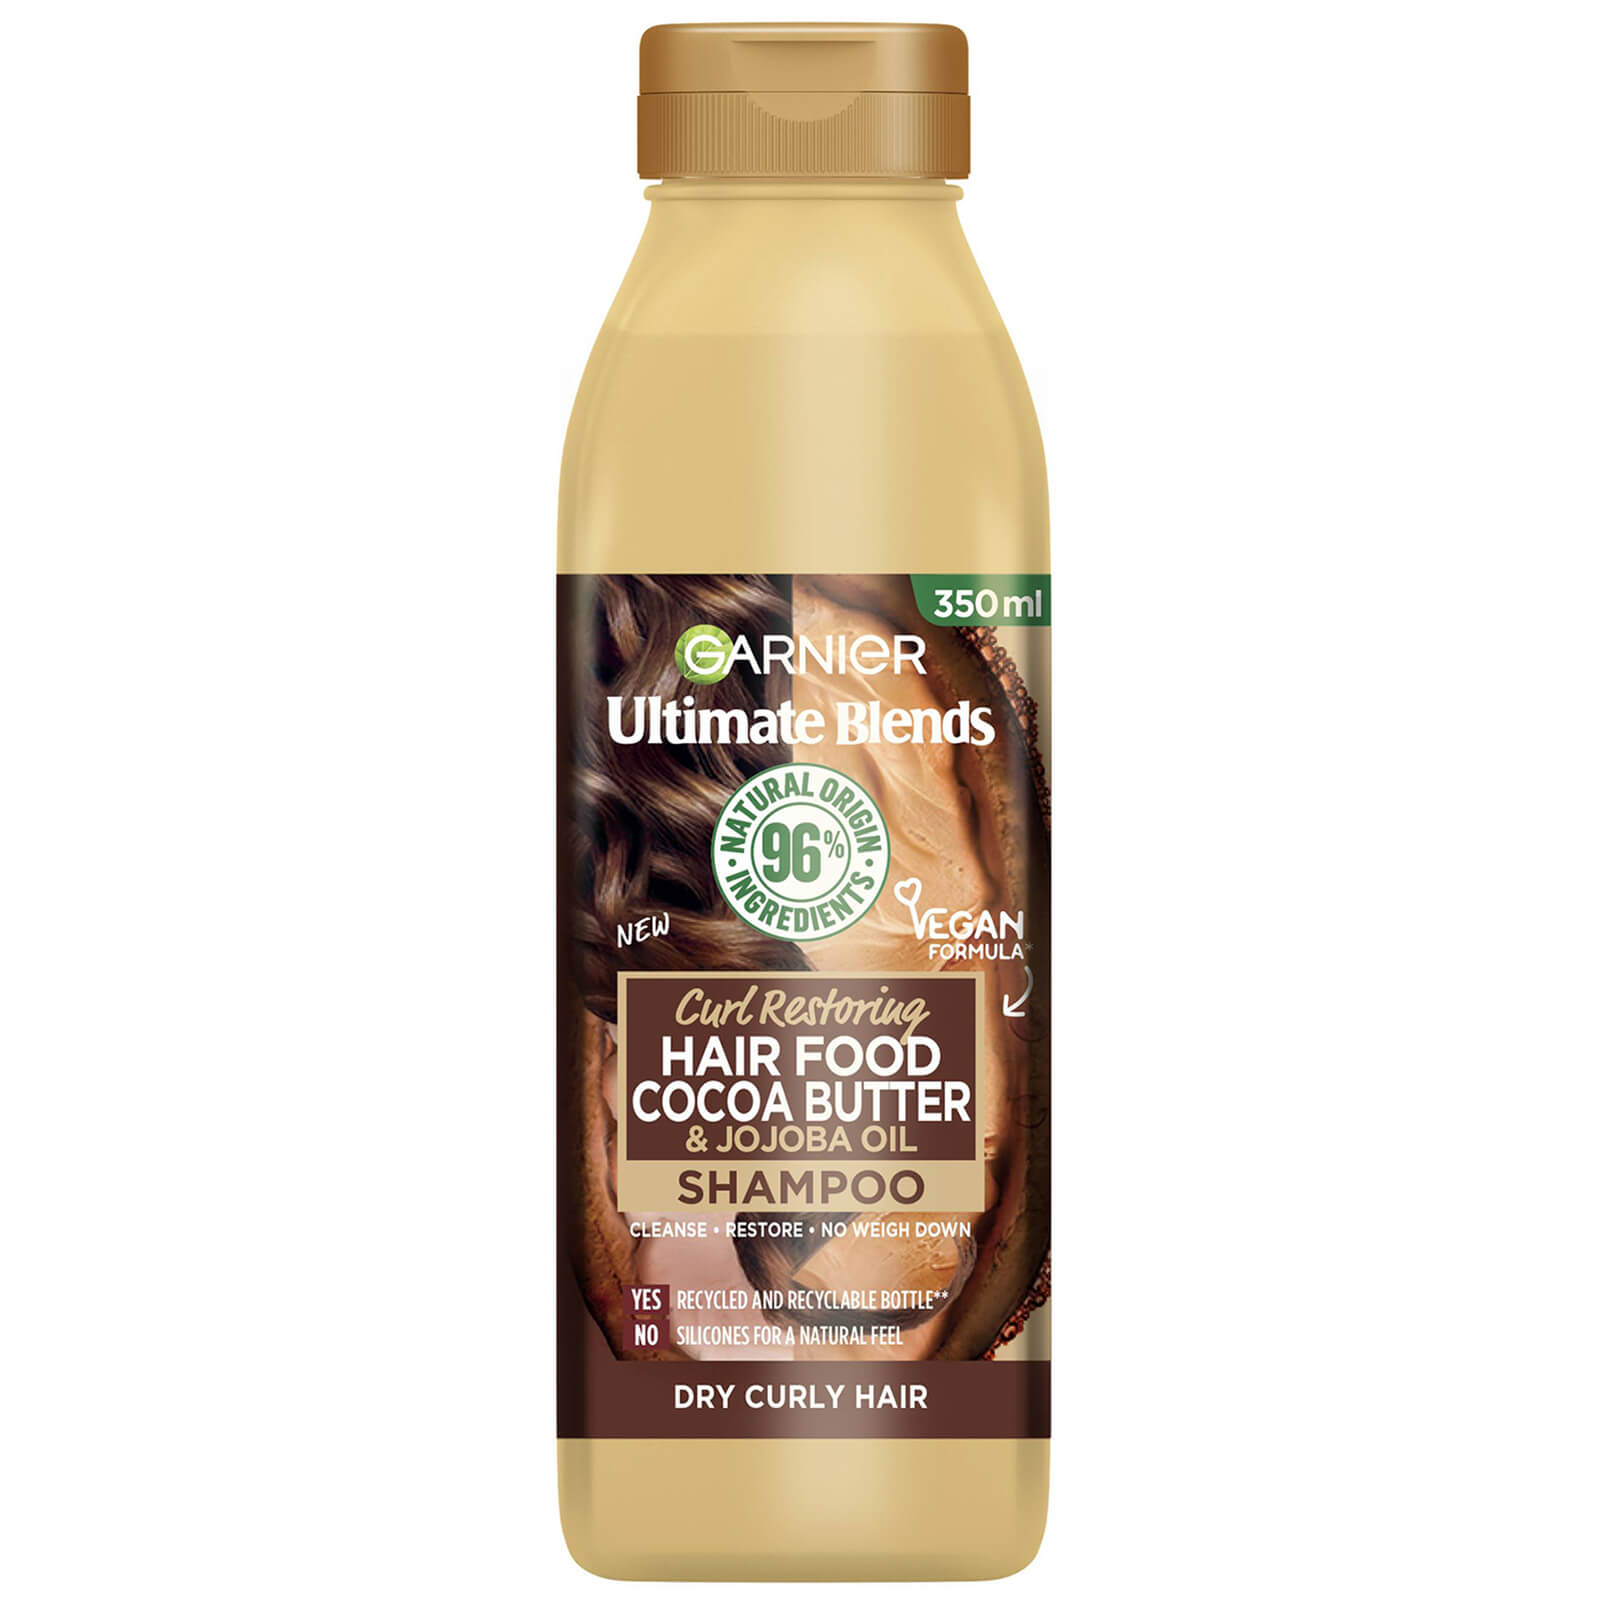 Garnier Ultimate Blends Cocoa Butter Shampoo for Dry, Curly Hair 350ml product